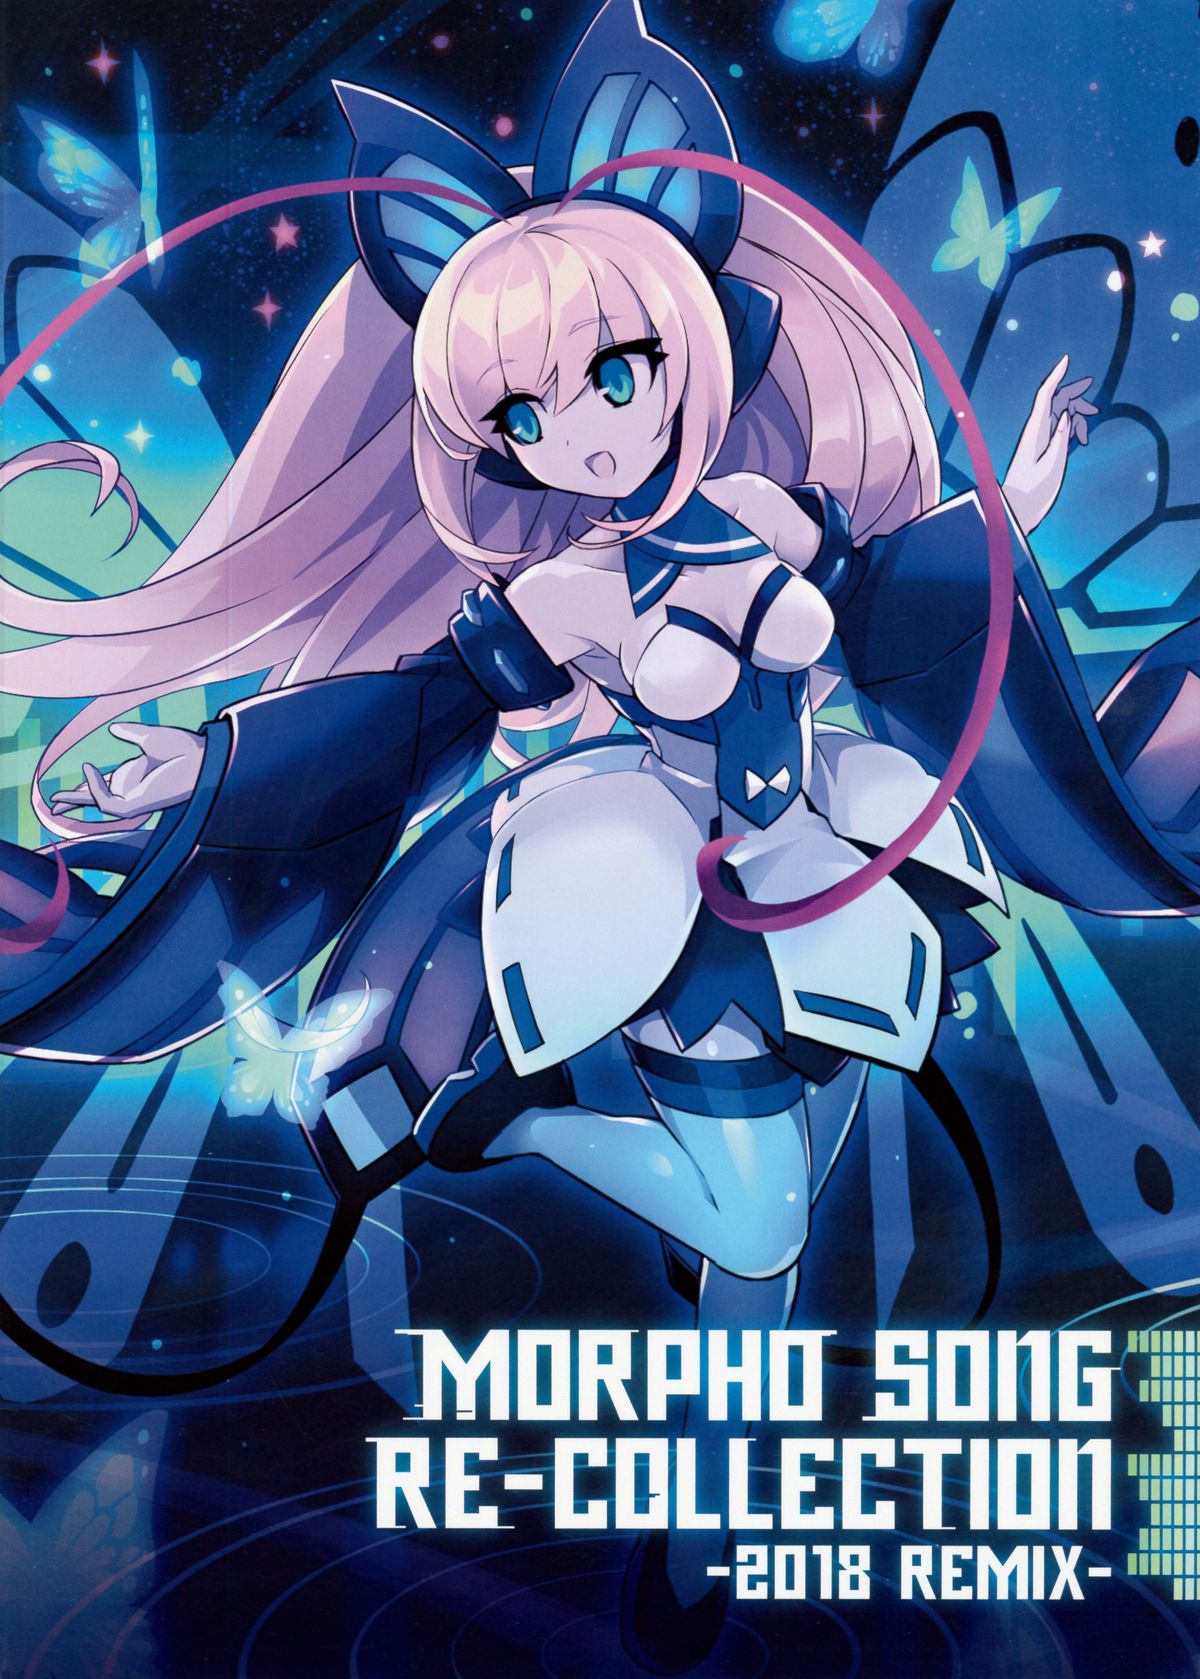 MORPHO SONG RE-COLLECTION -2018 REMIX-